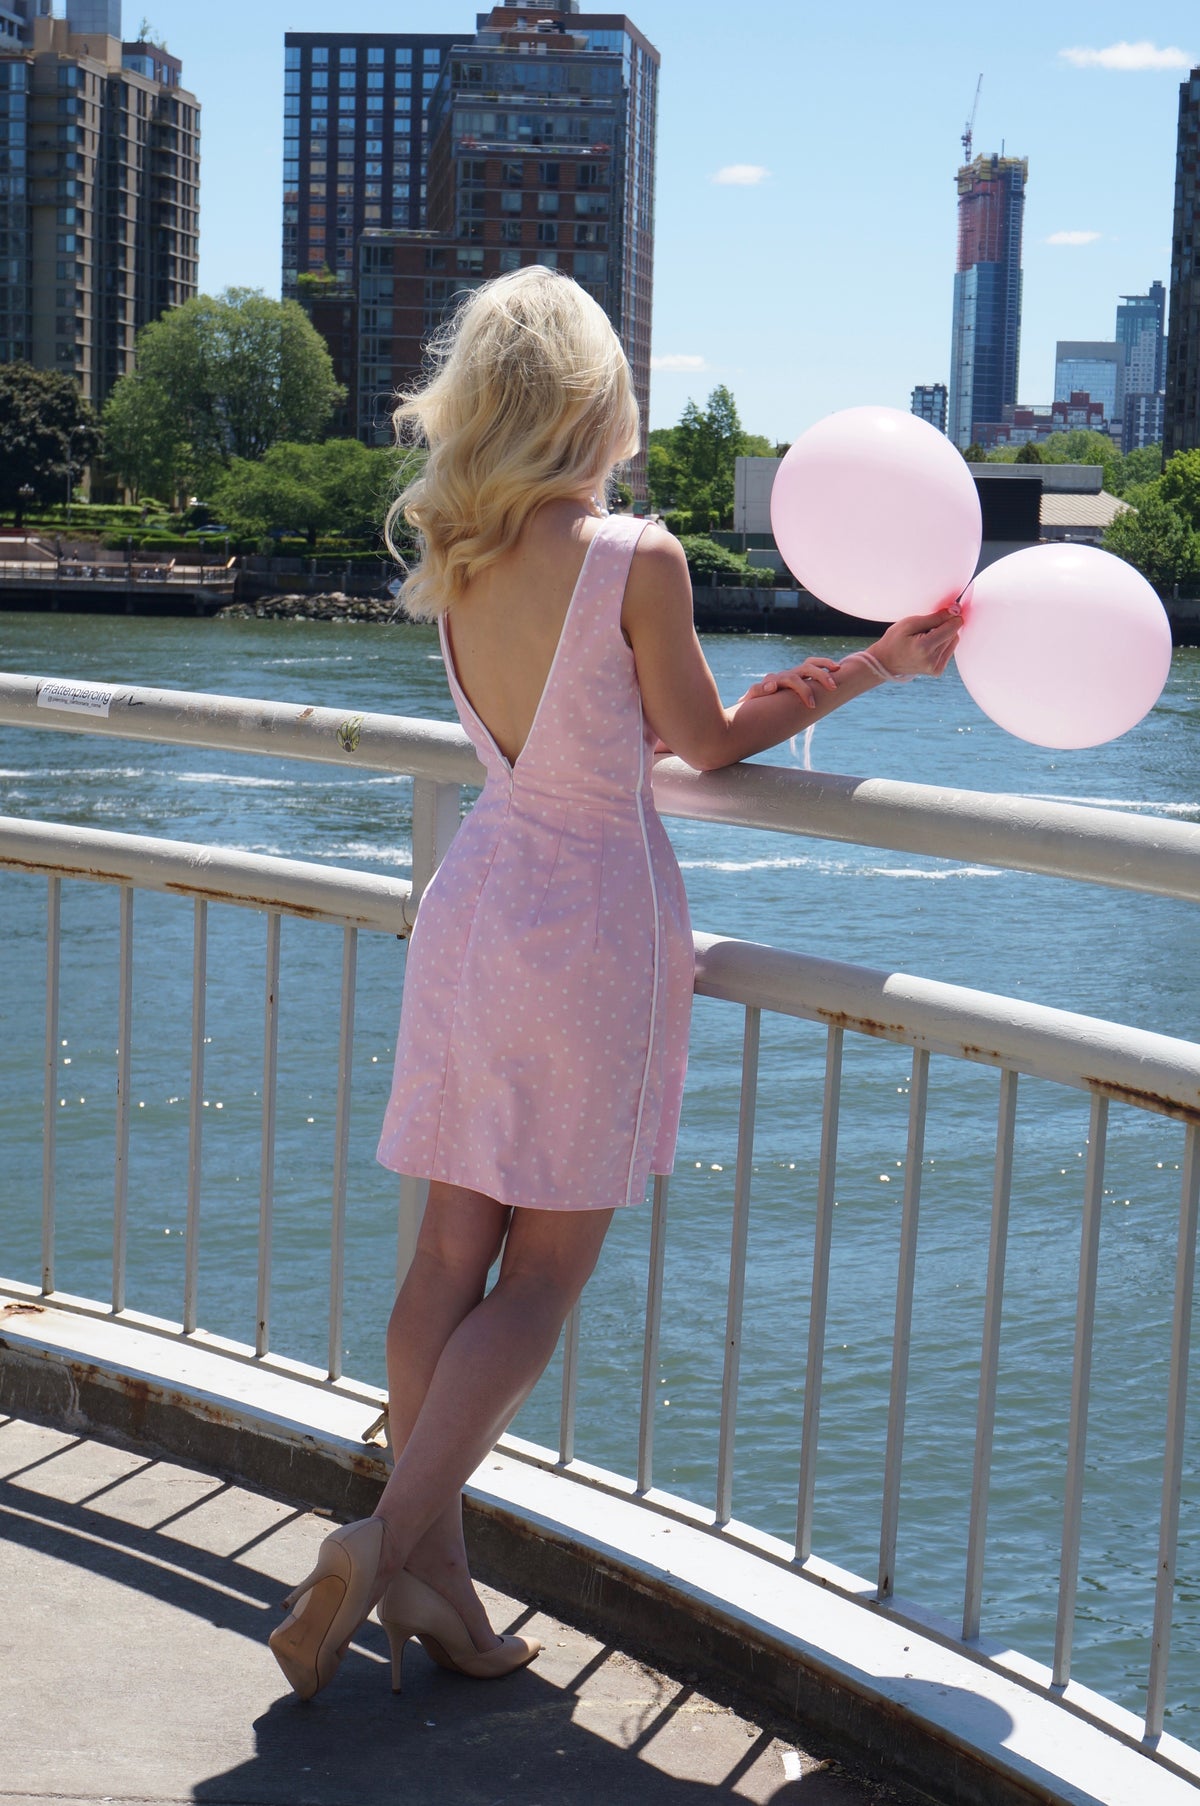 Back of model wearing pink and white polka dot print dress with white piping holding two balloons in front of water.